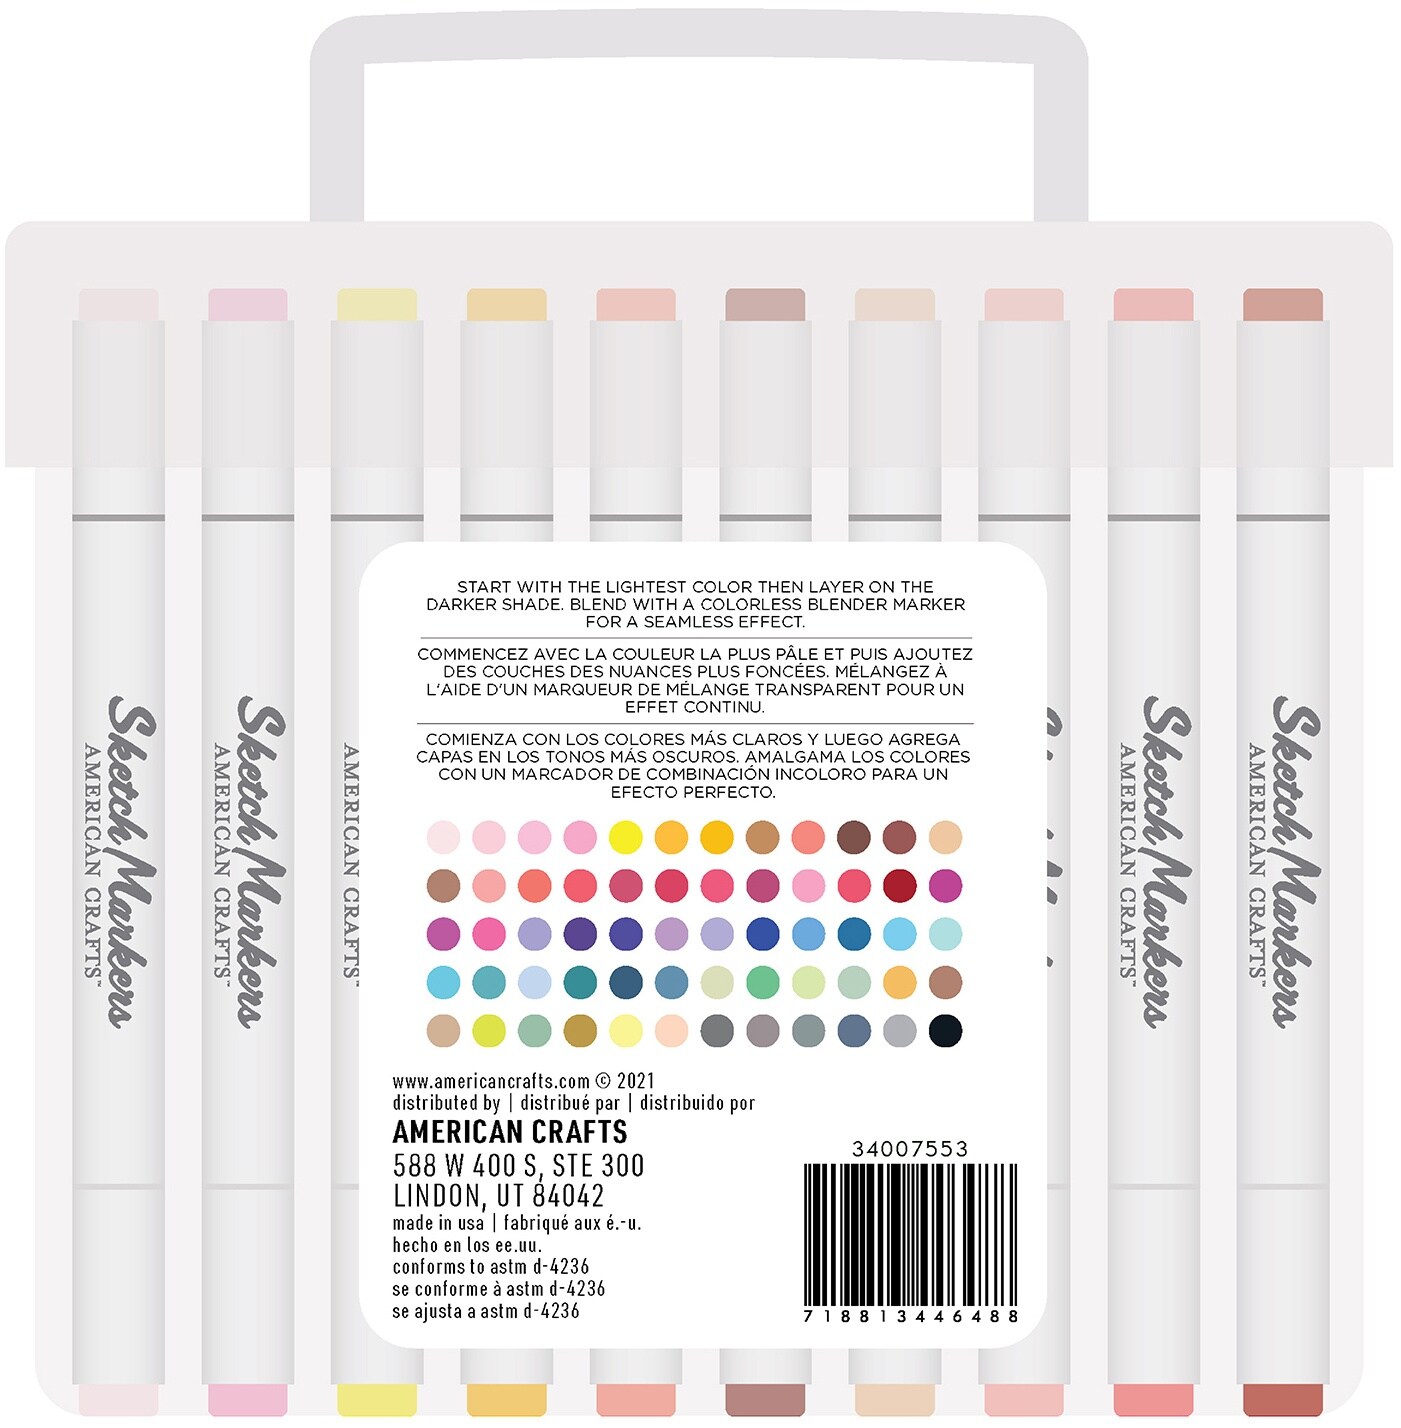 AC Sketch Markers Dual-Tip Alcohol Markers 48/Pkg-Assorted Colors